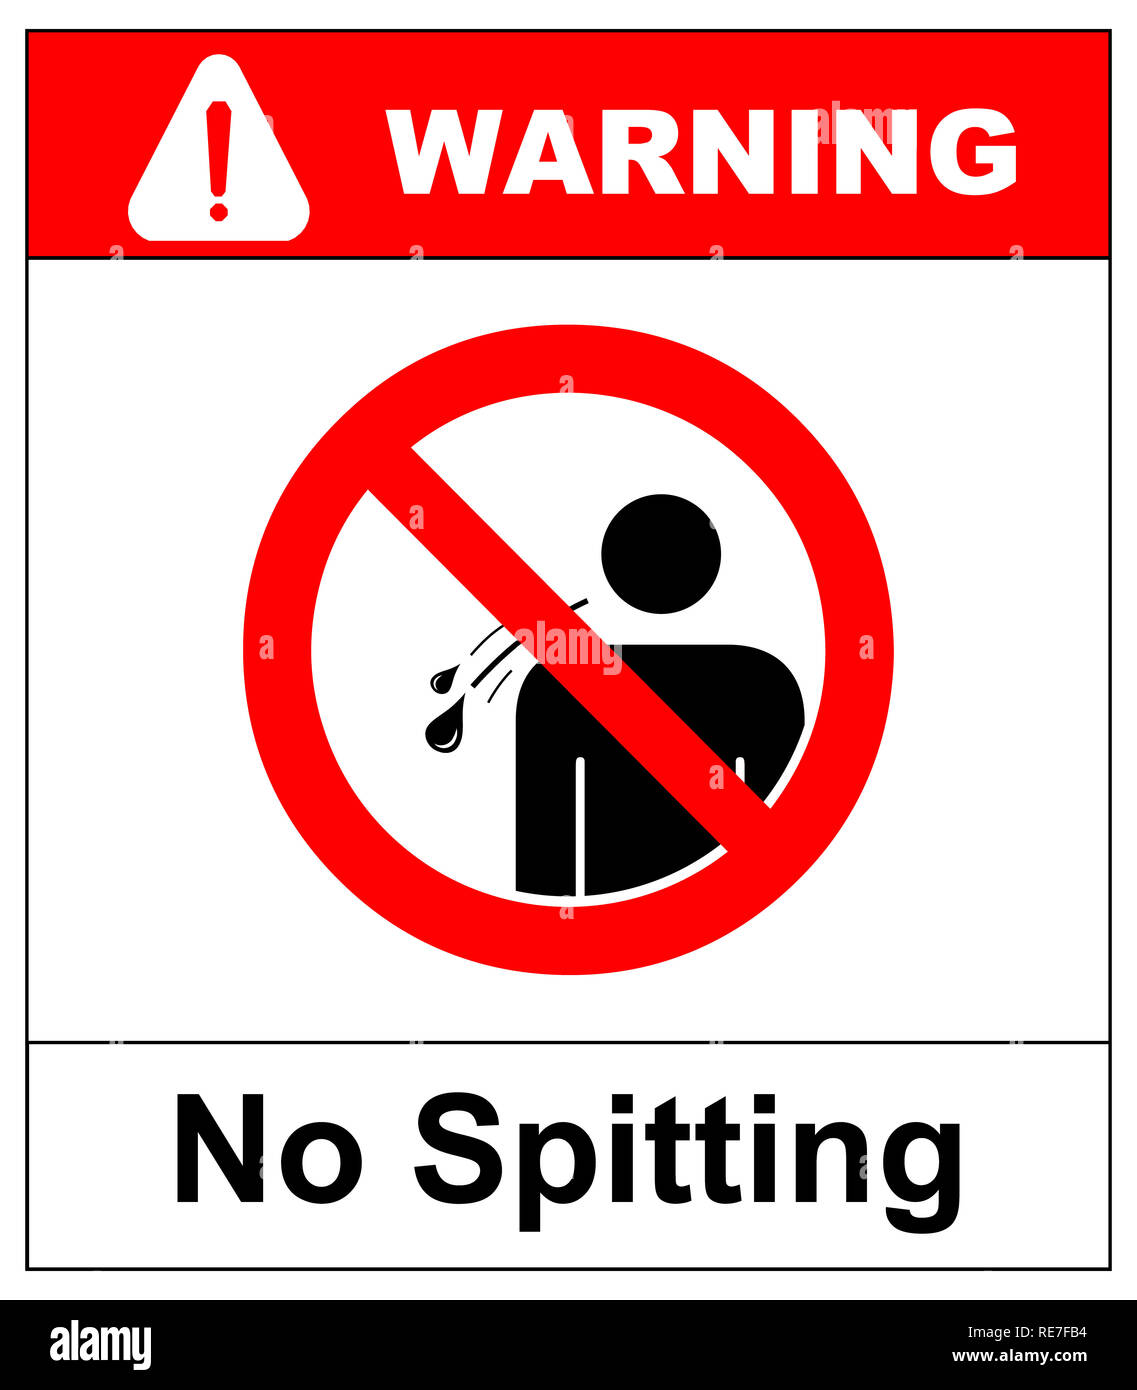 No spitting sign.  illustration isolated on white. Warning sign in red circle Stock Photo